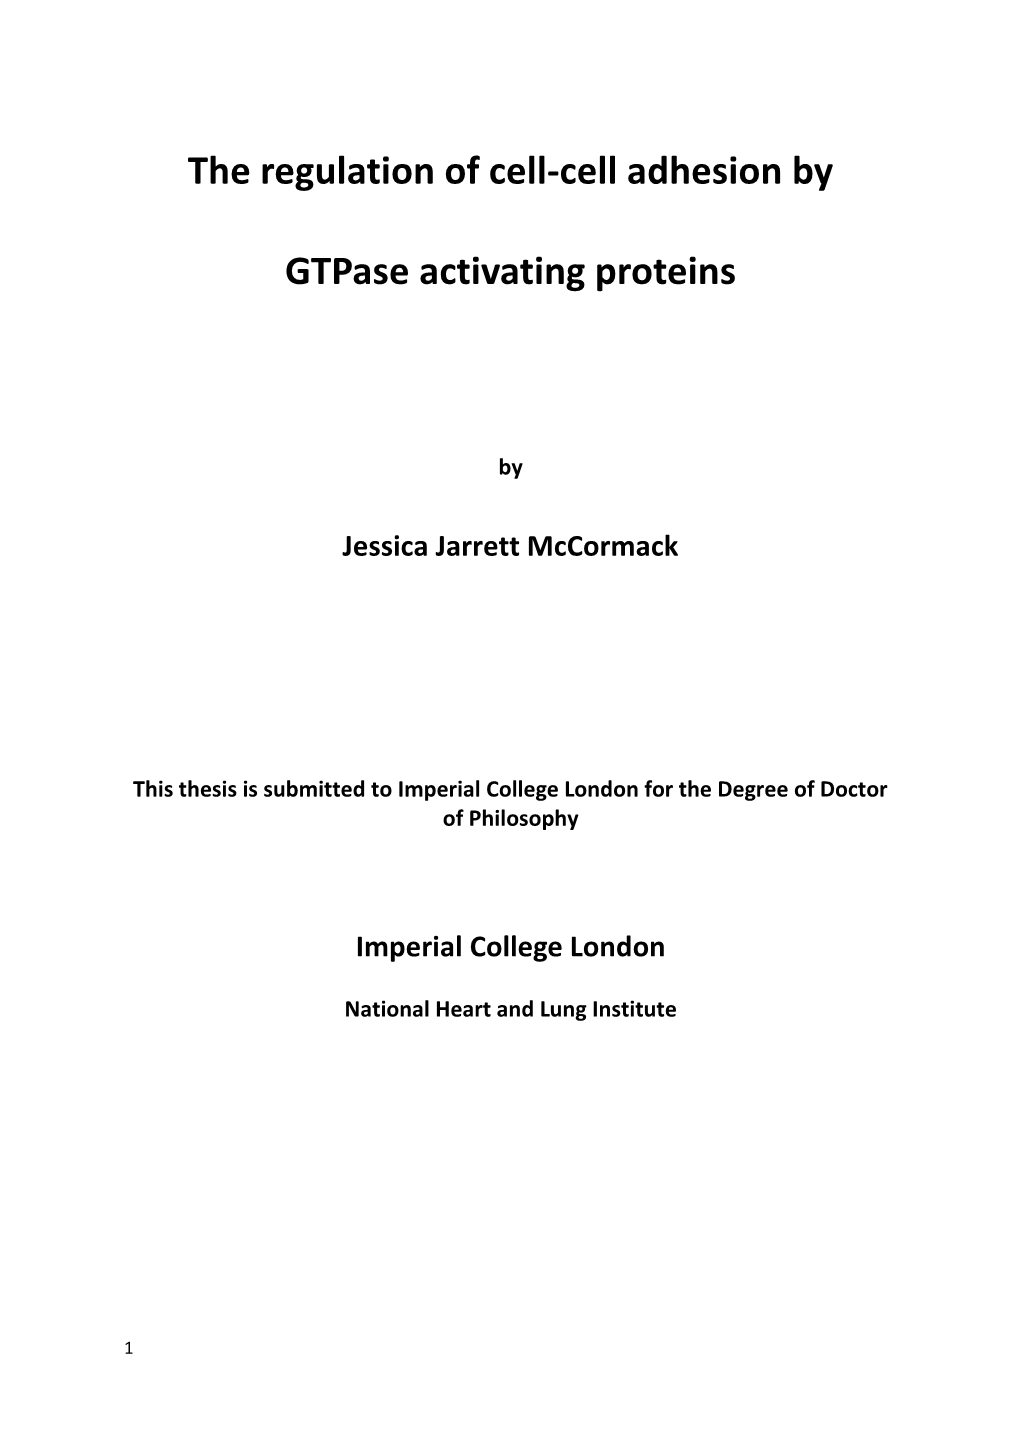 The Regulation of Cell-Cell Adhesion by Gtpase Activating Proteins